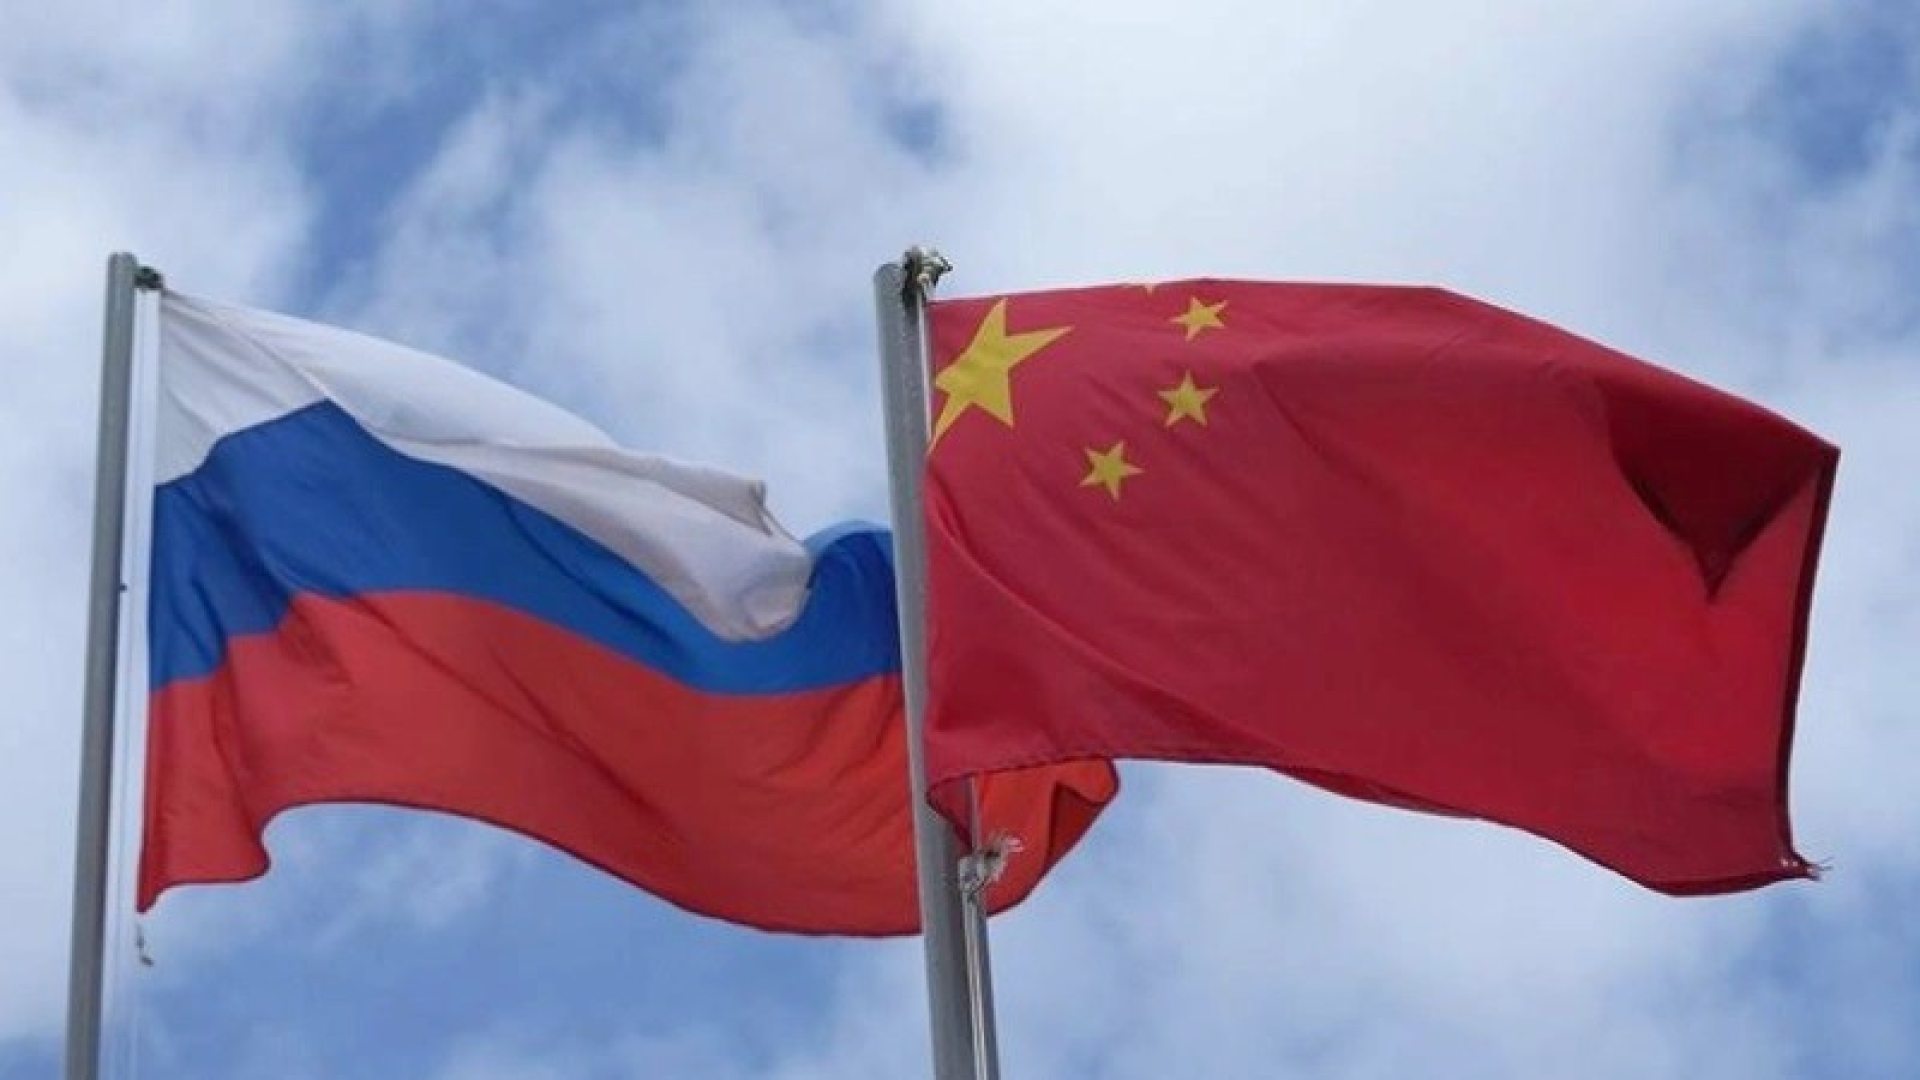 "Five bridges" between Russia and China